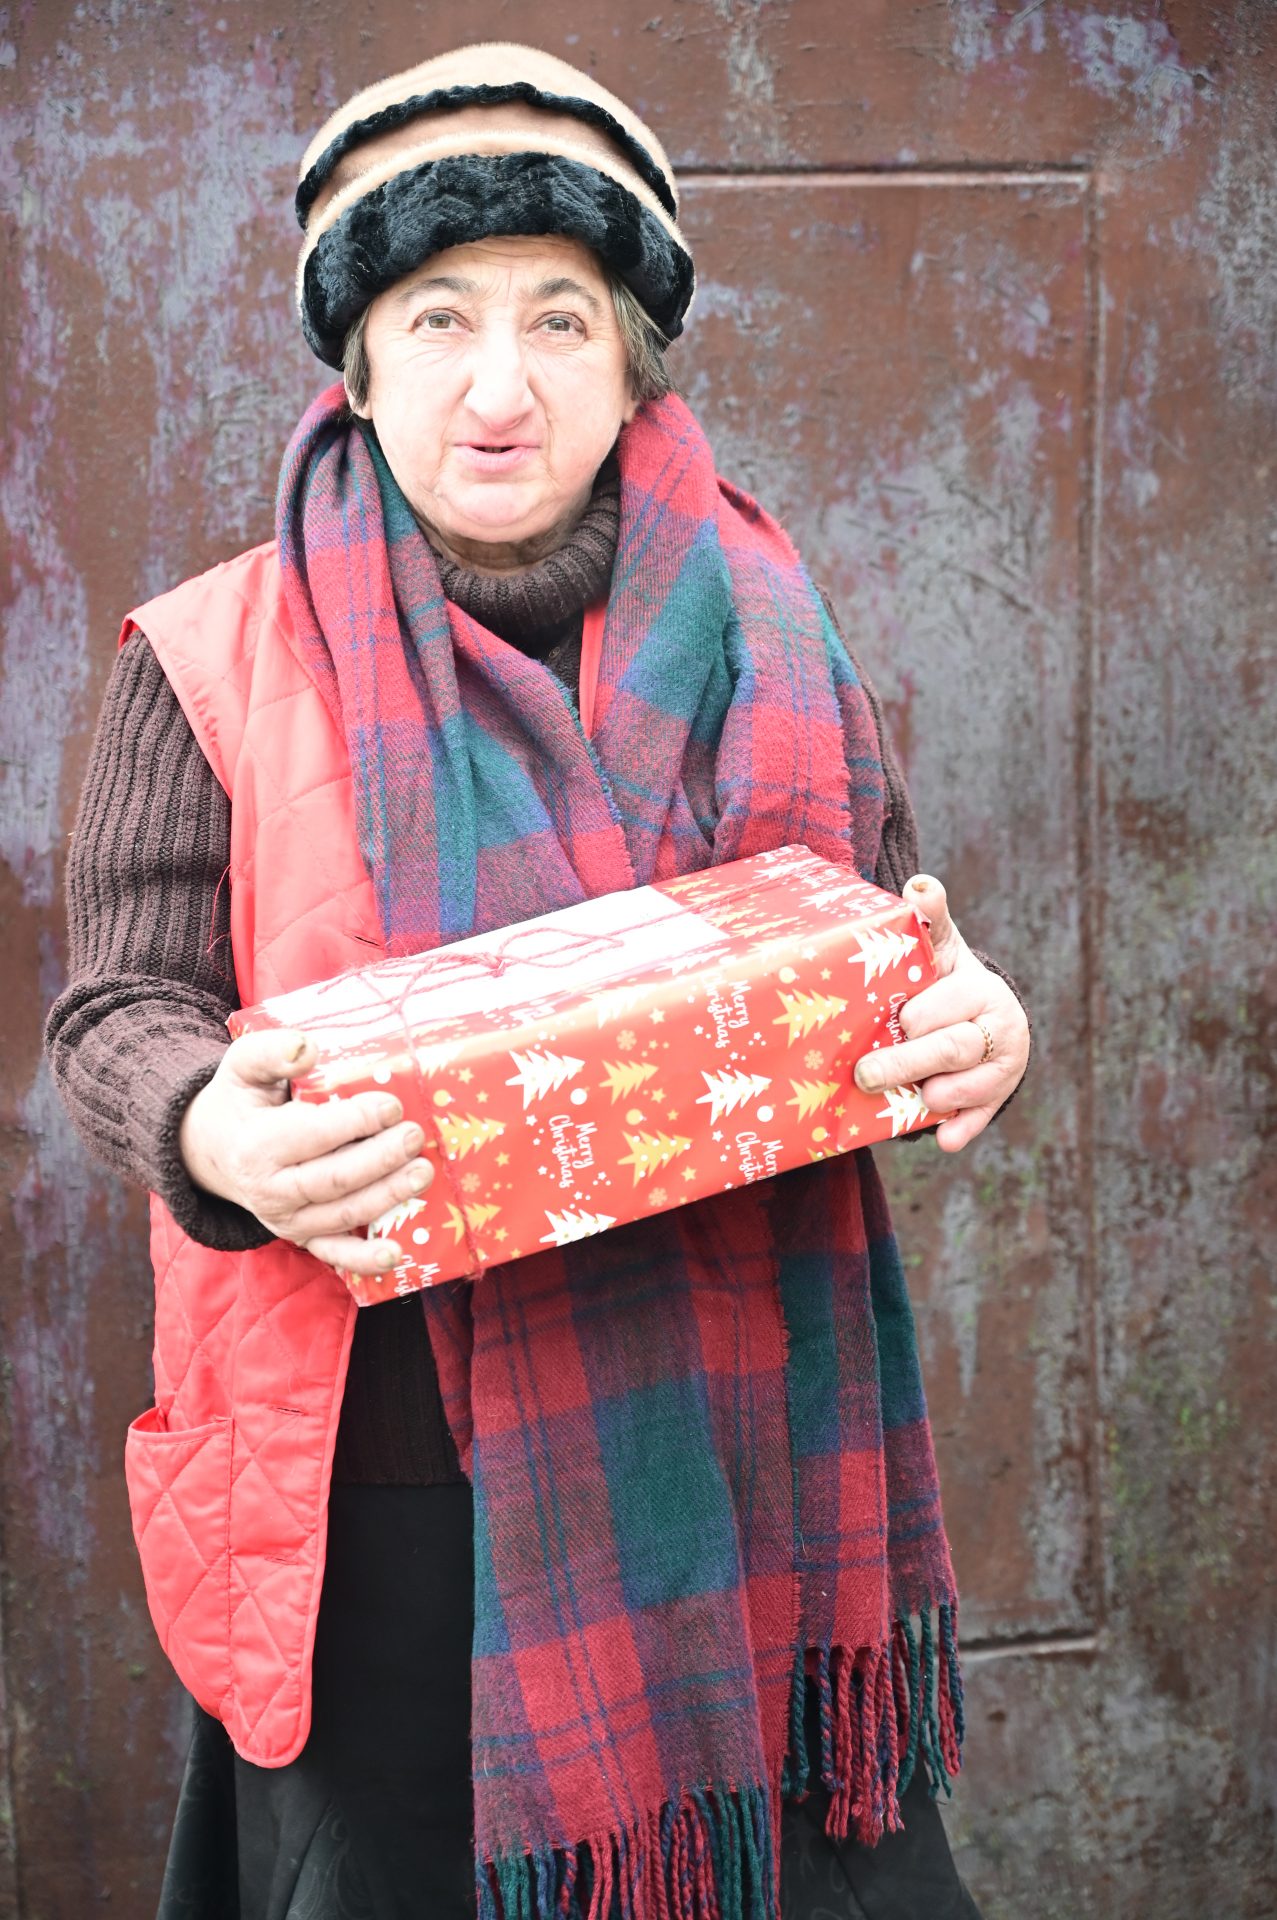 Link to Hope Shoebox Appeal - Lady with missing fingers